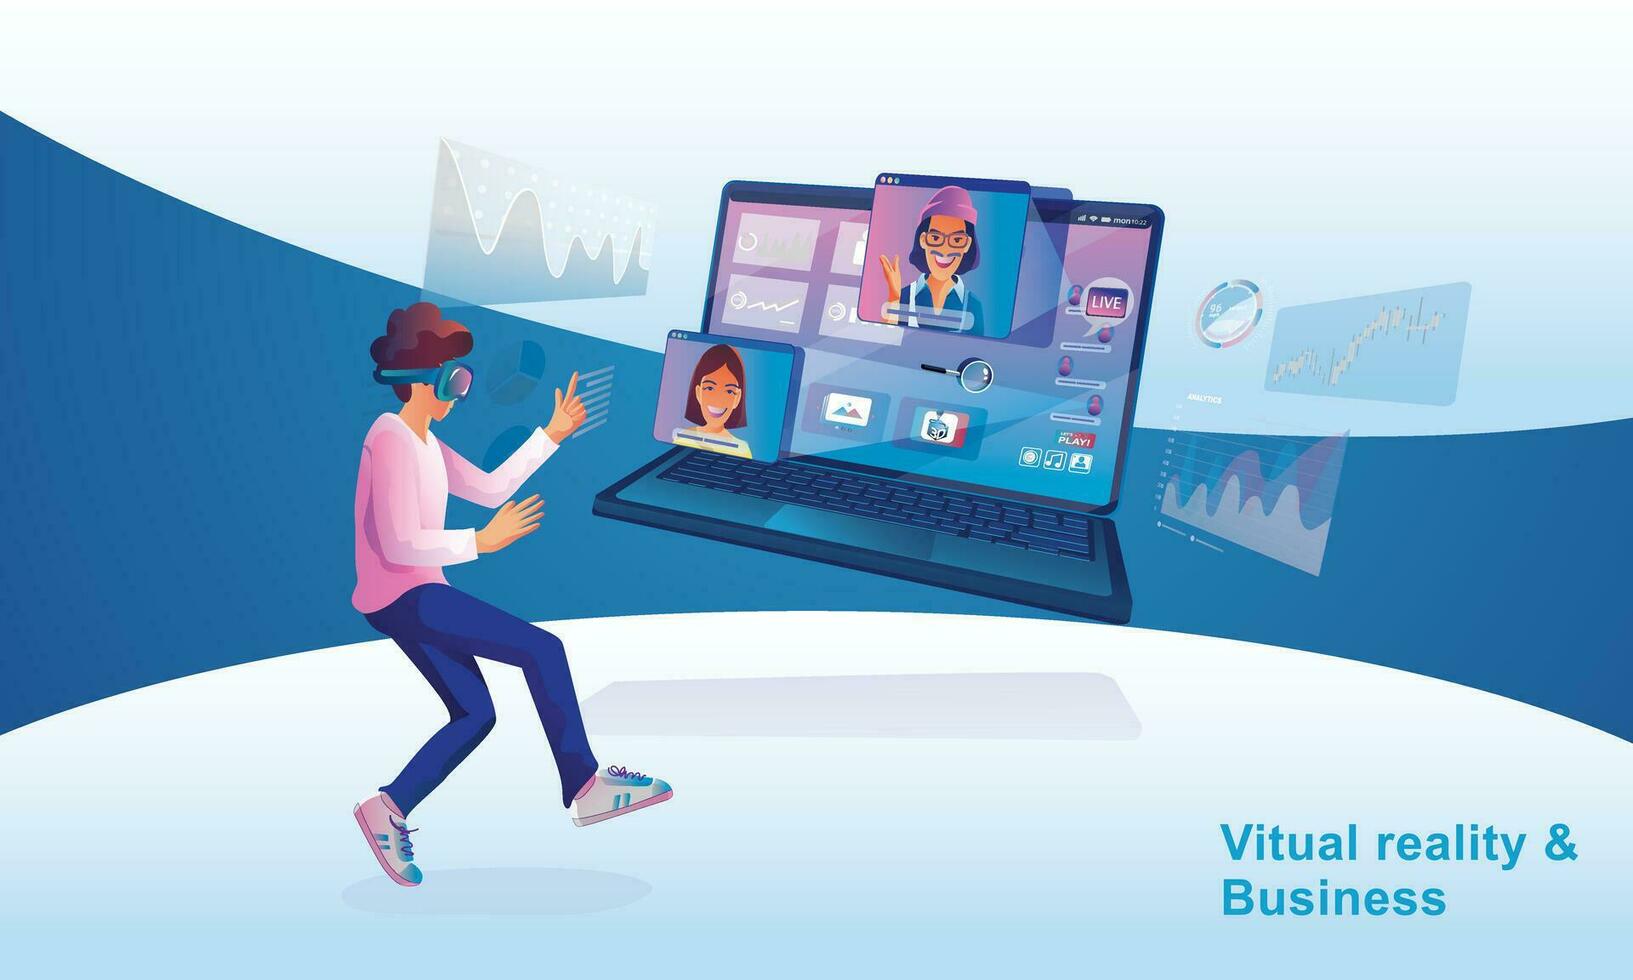 Businessman wearing a VR headset floating in cyberspace. Simulation of the virtual digital world for entertainment and visual experience in the metaverse. Flat vector illustration